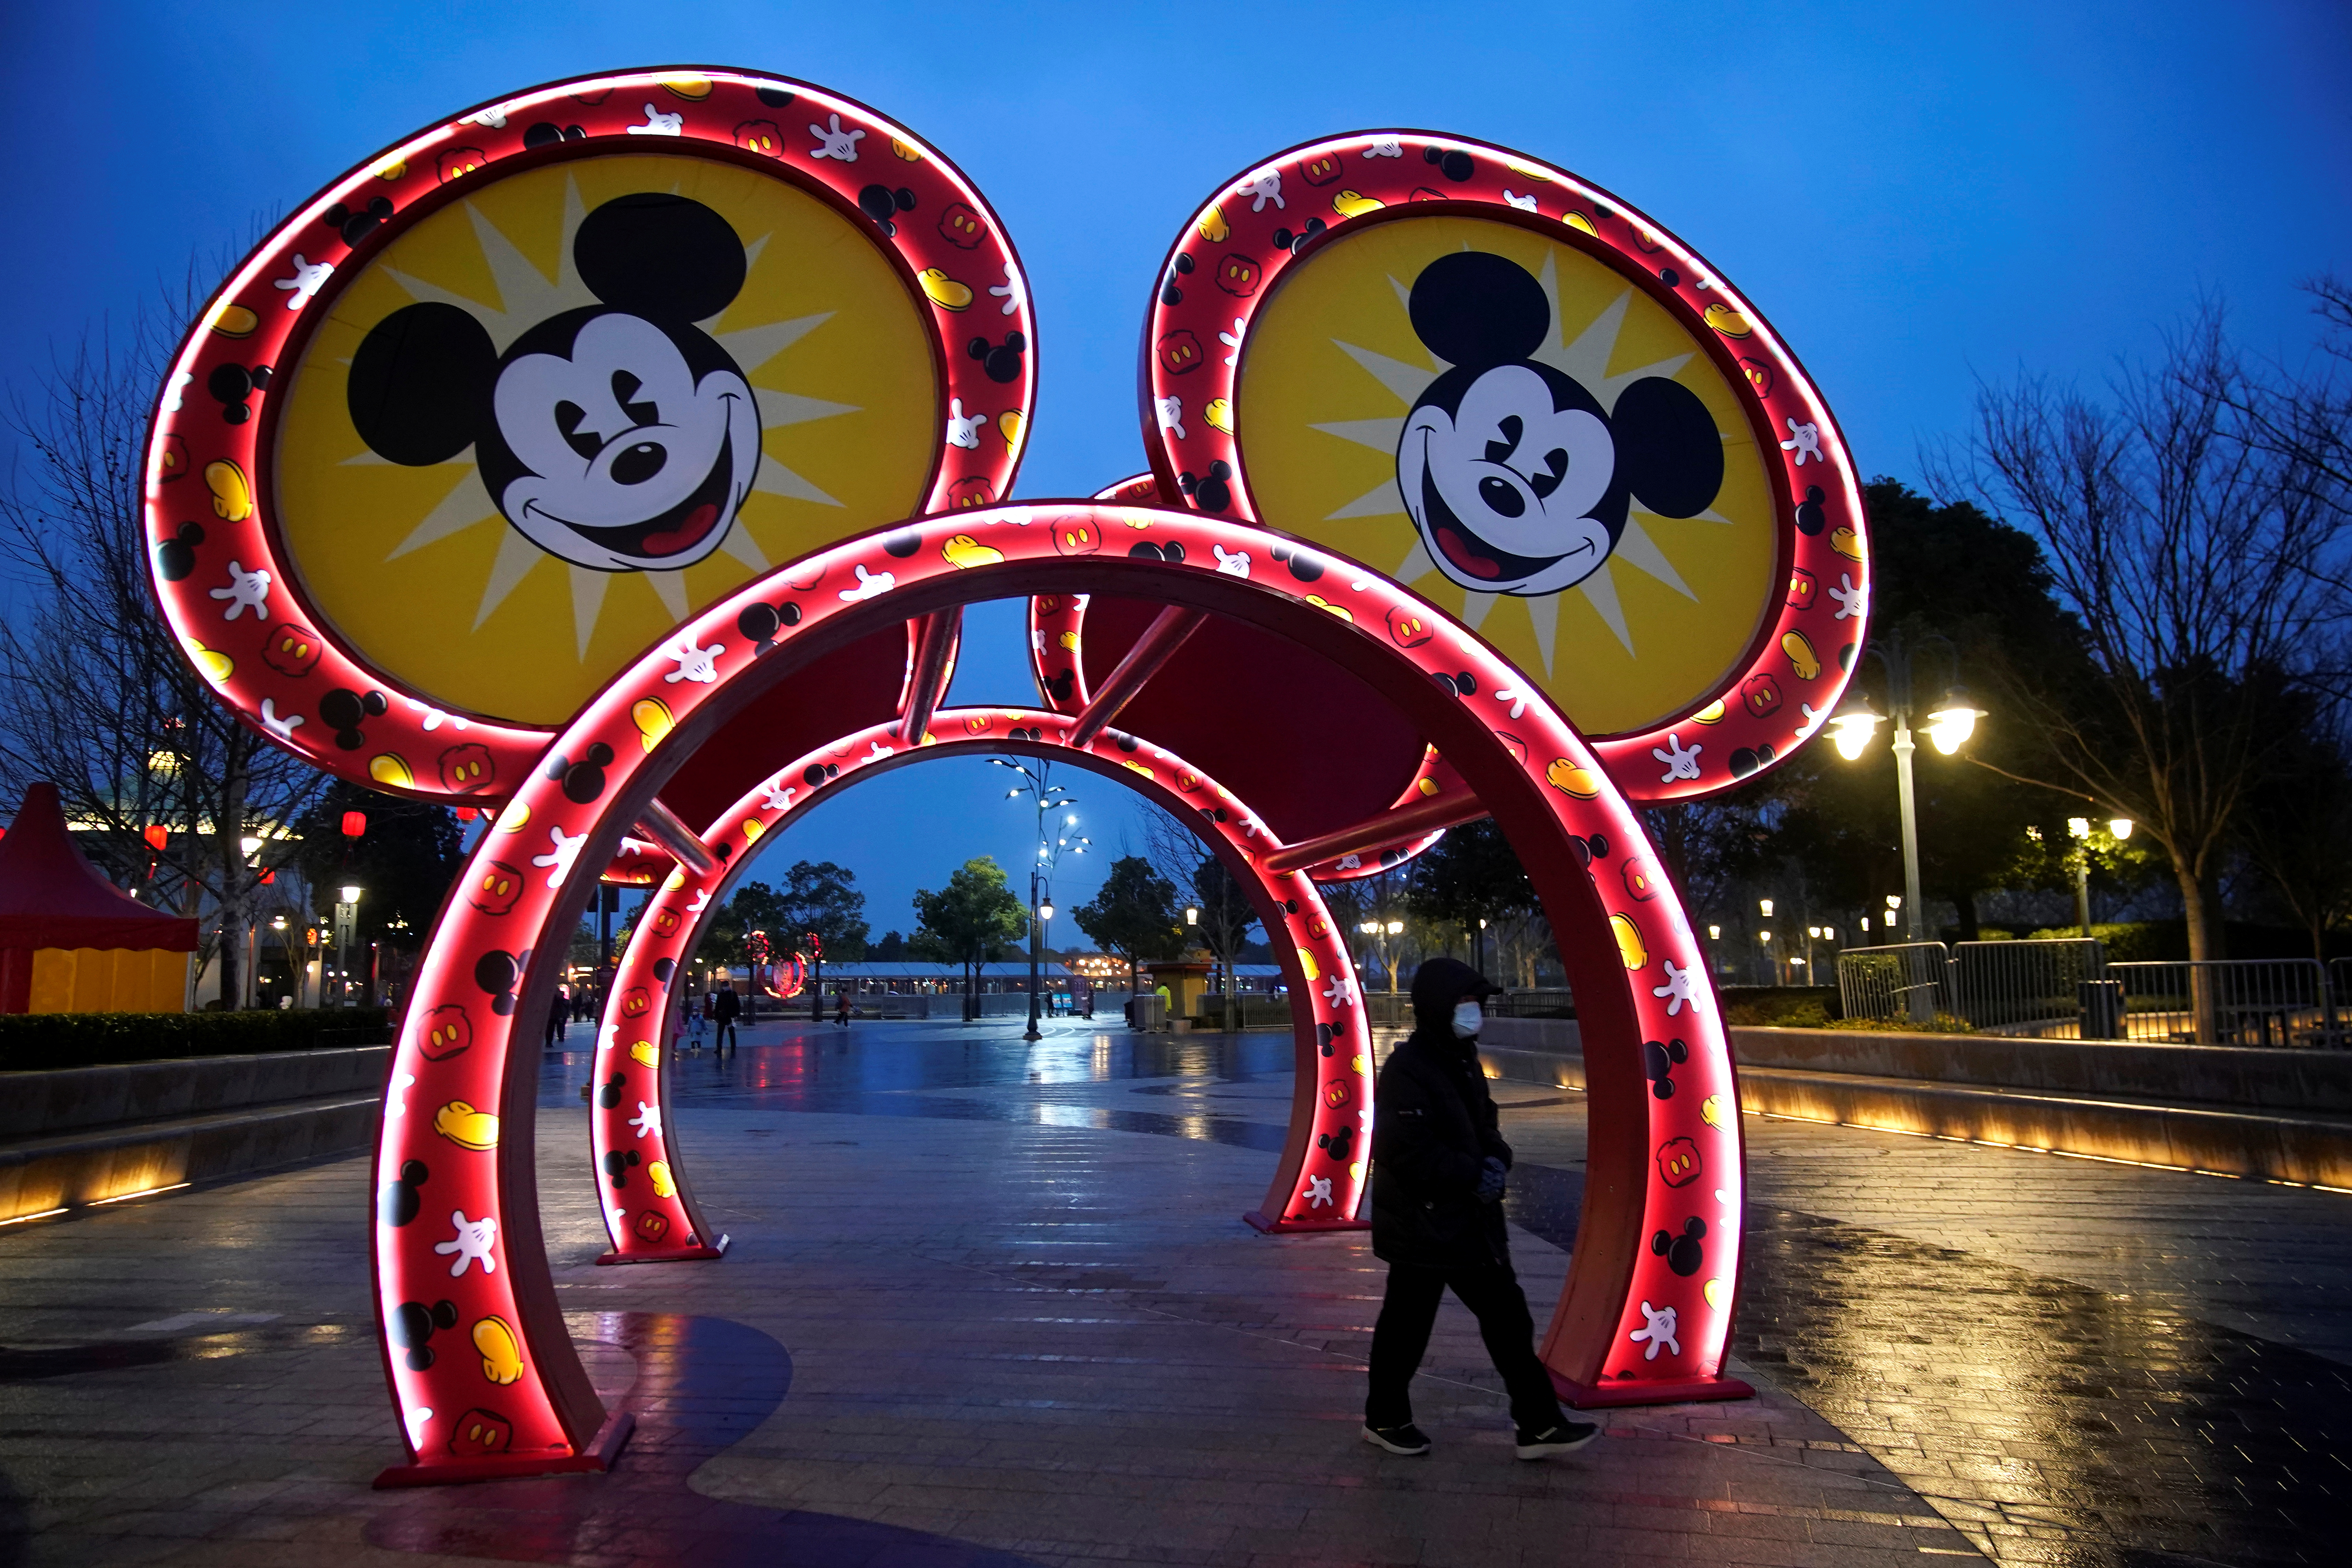 Walt Disney Co said yesterday it would lay off 32,000 workers, primarily at its theme parks. — Reuters pic